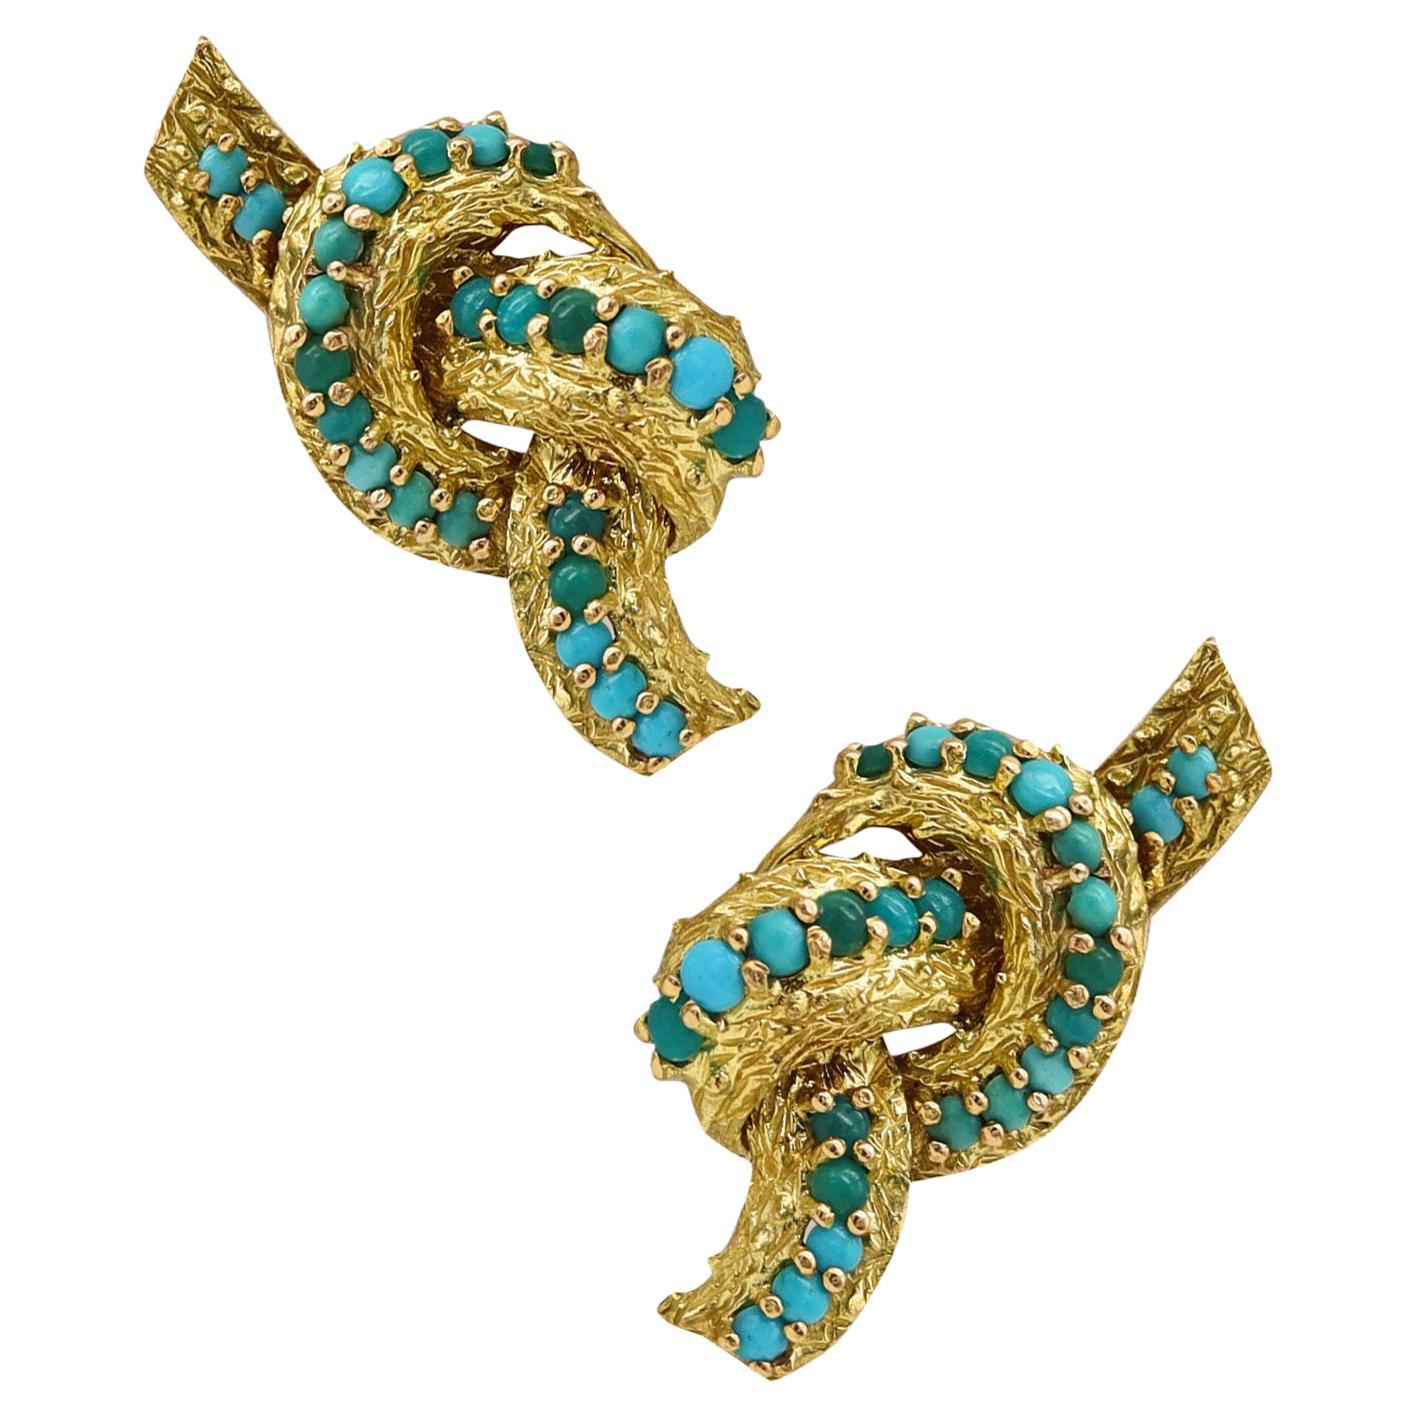 Tiffany & Co. 1960 France Knots Clips Earrings in 18Kt Gold with Blue Turquoises